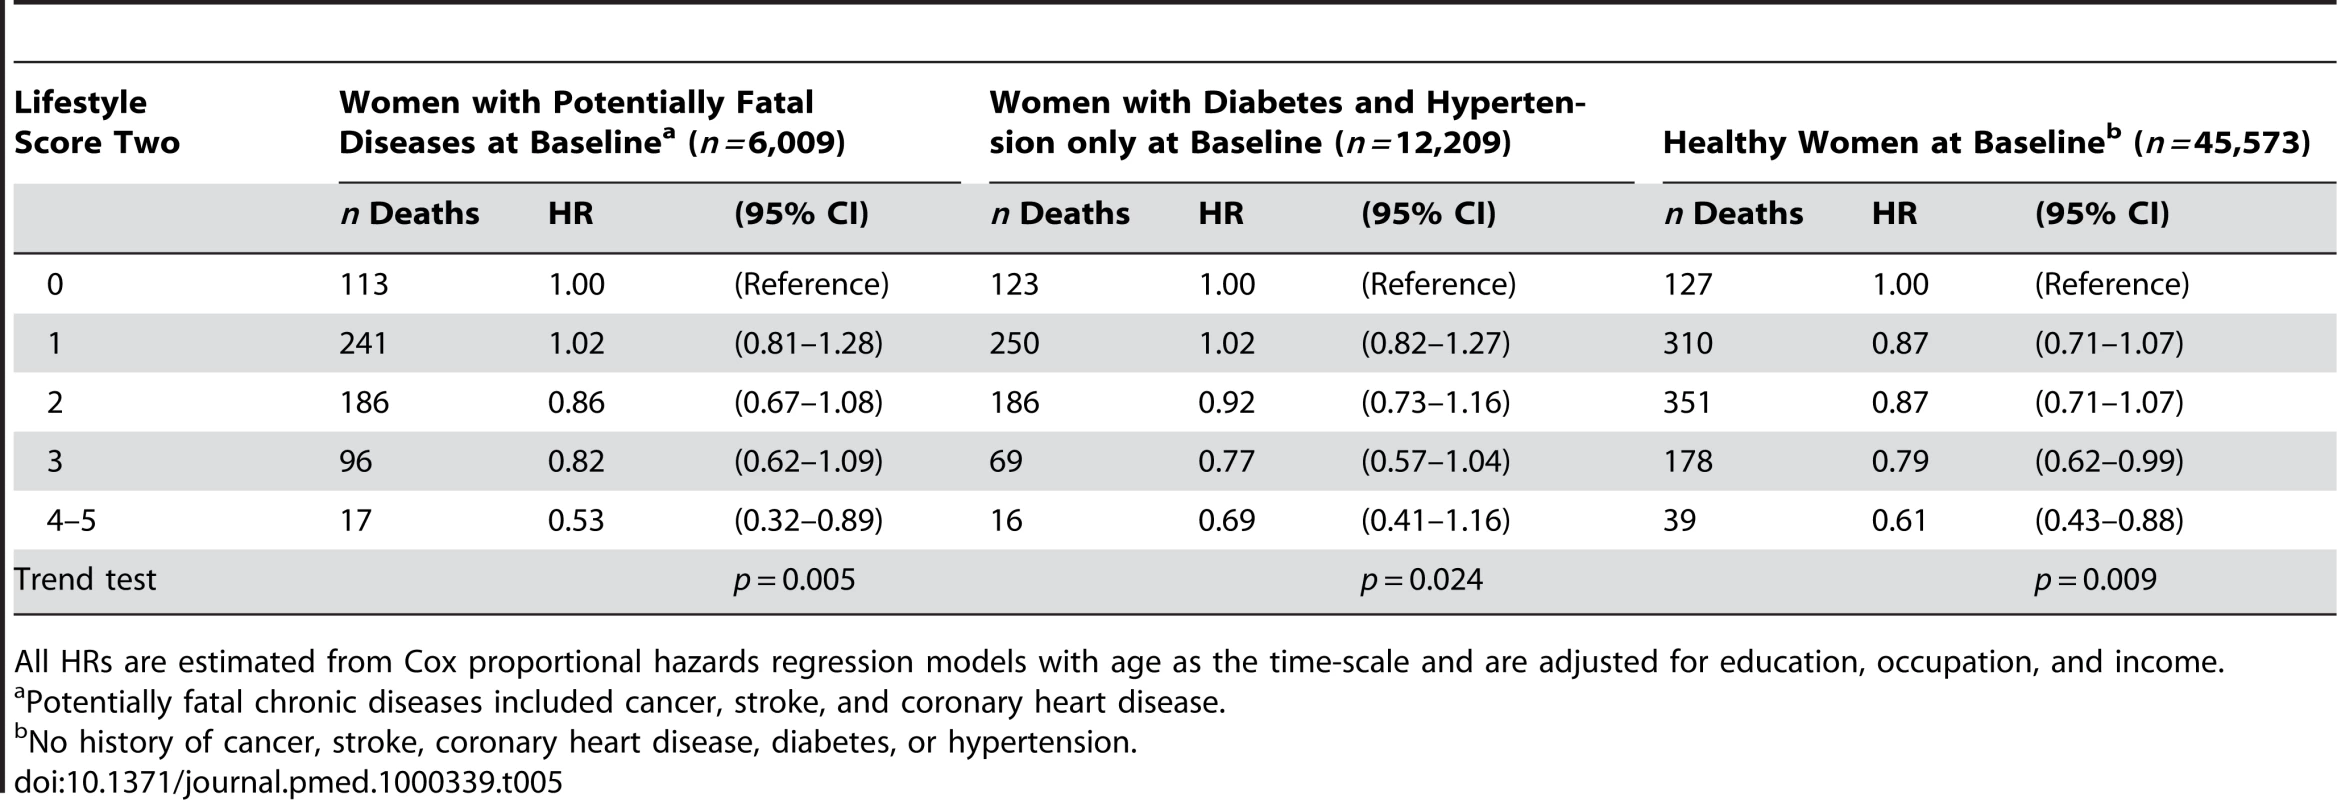 Healthy lifestyle score two and risk of all-cause mortality among nonsmoking and nondrinking women aged 40–70 y by chronic disease status at baseline, Shanghai Women's Health Study, 1996–2007.